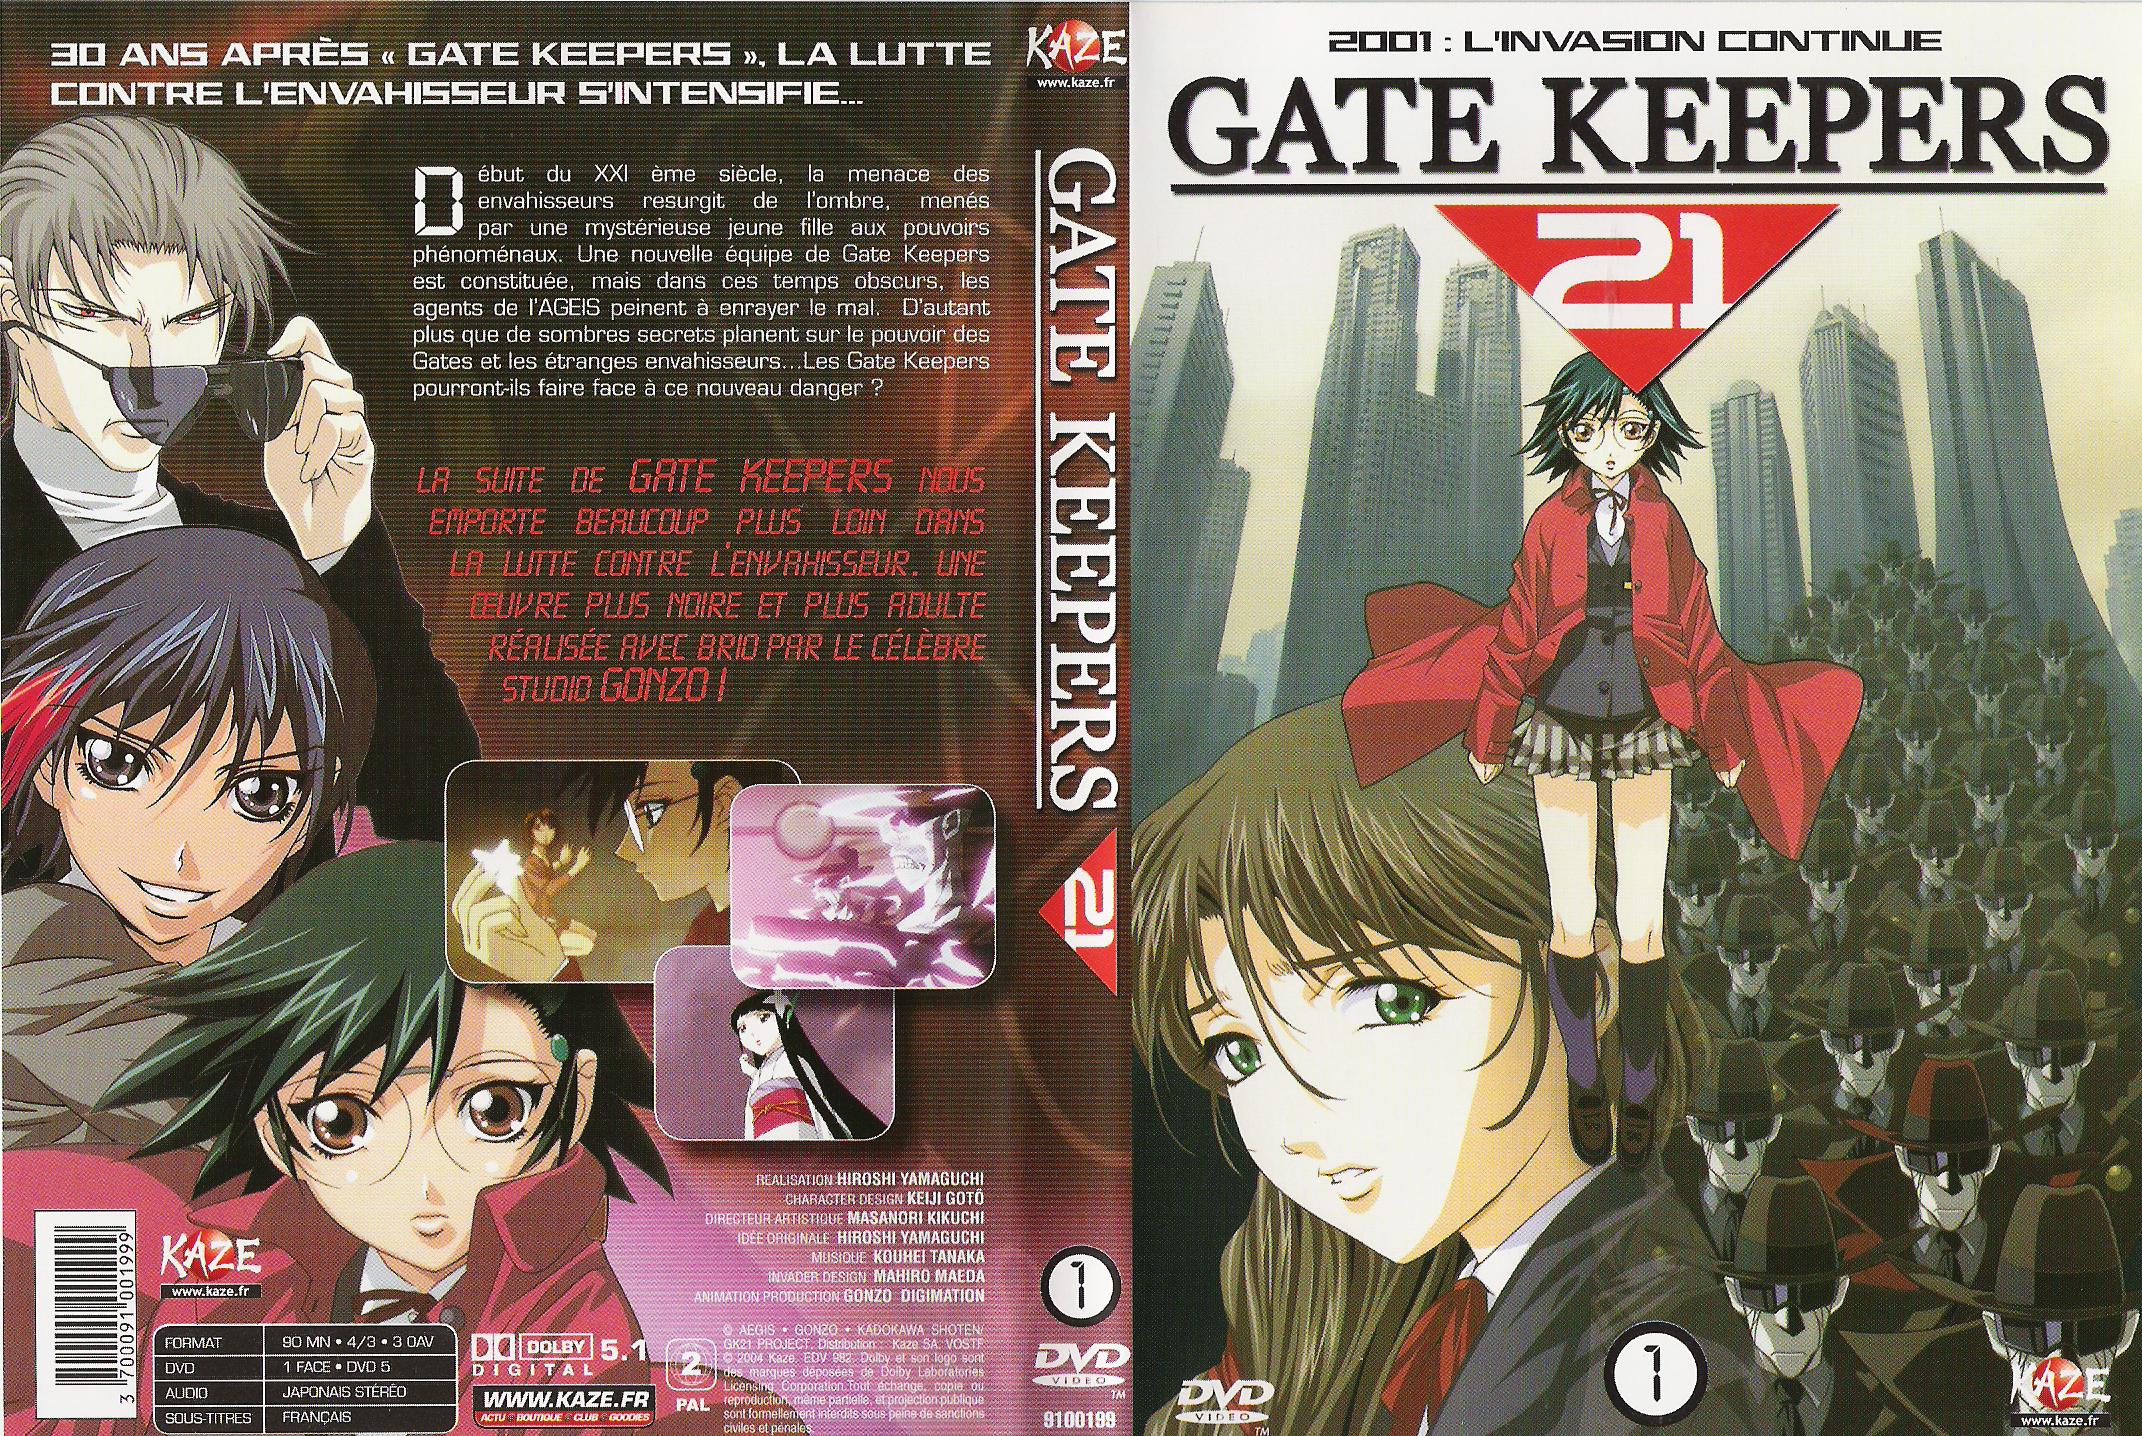 Jaquette DVD Gate Keepers 21 DVD 1